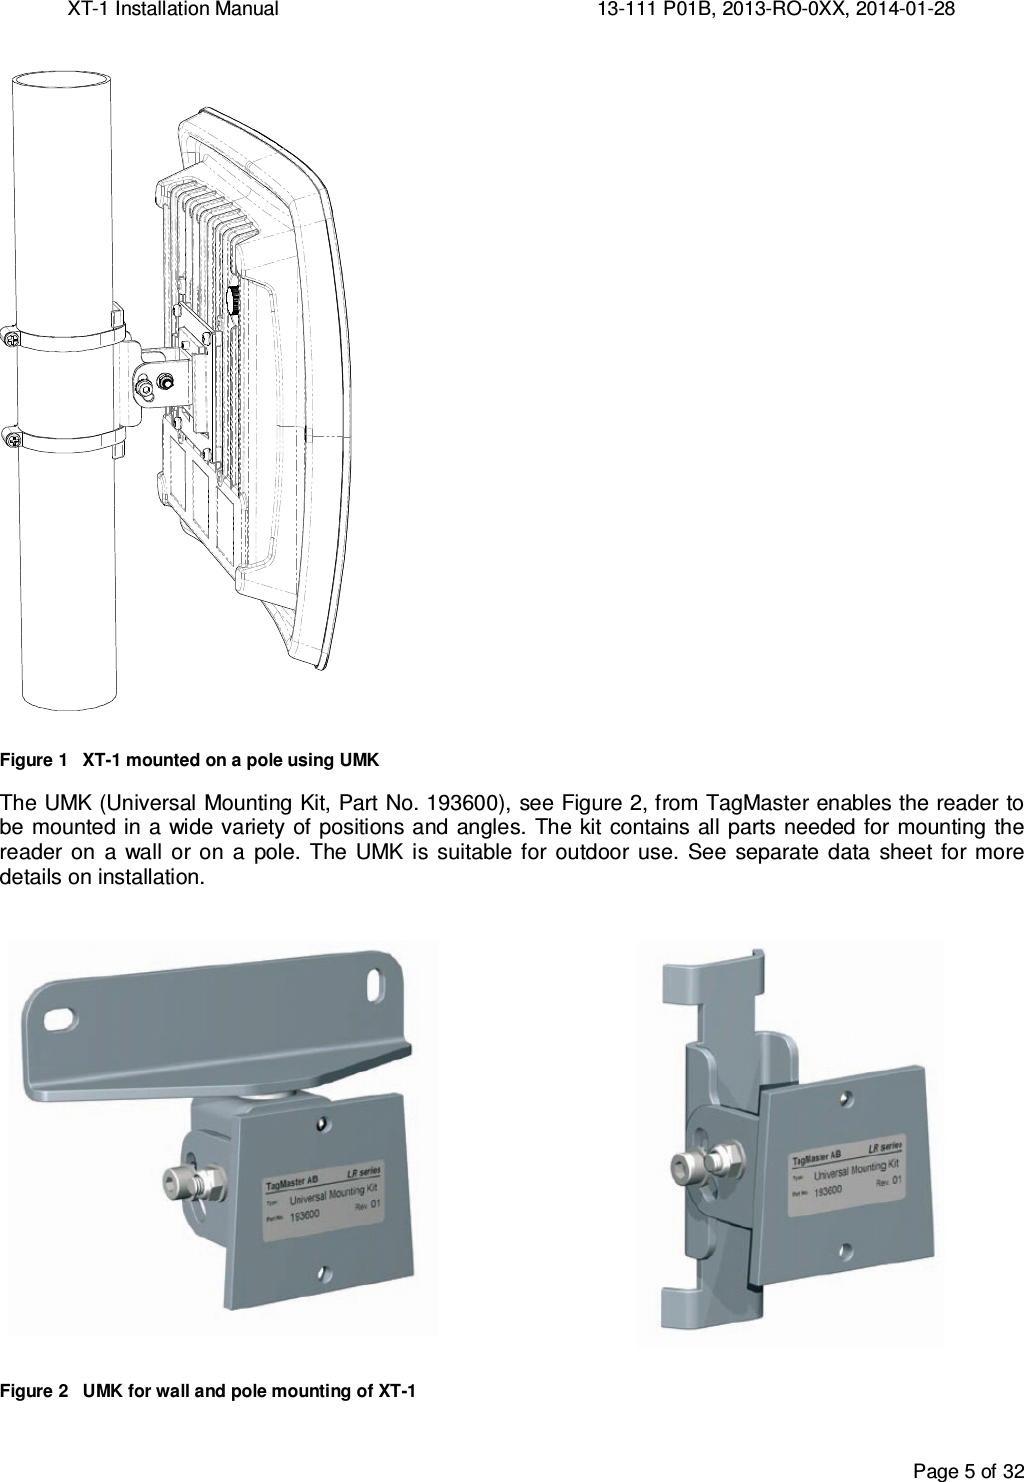 XT-1 Installation Manual     13-111 P01B, 2013-RO-0XX, 2014-01-28  Page 5 of 32     Figure 1   XT-1 mounted on a pole using UMK The UMK (Universal Mounting Kit, Part No. 193600), see Figure 2, from TagMaster enables the reader to be mounted in a wide variety of positions and angles. The kit  contains all parts needed for mounting the reader  on  a  wall  or on  a  pole.  The UMK  is  suitable  for  outdoor  use.  See separate  data sheet  for more details on installation.   Figure 2   UMK for wall and pole mounting of XT-1  